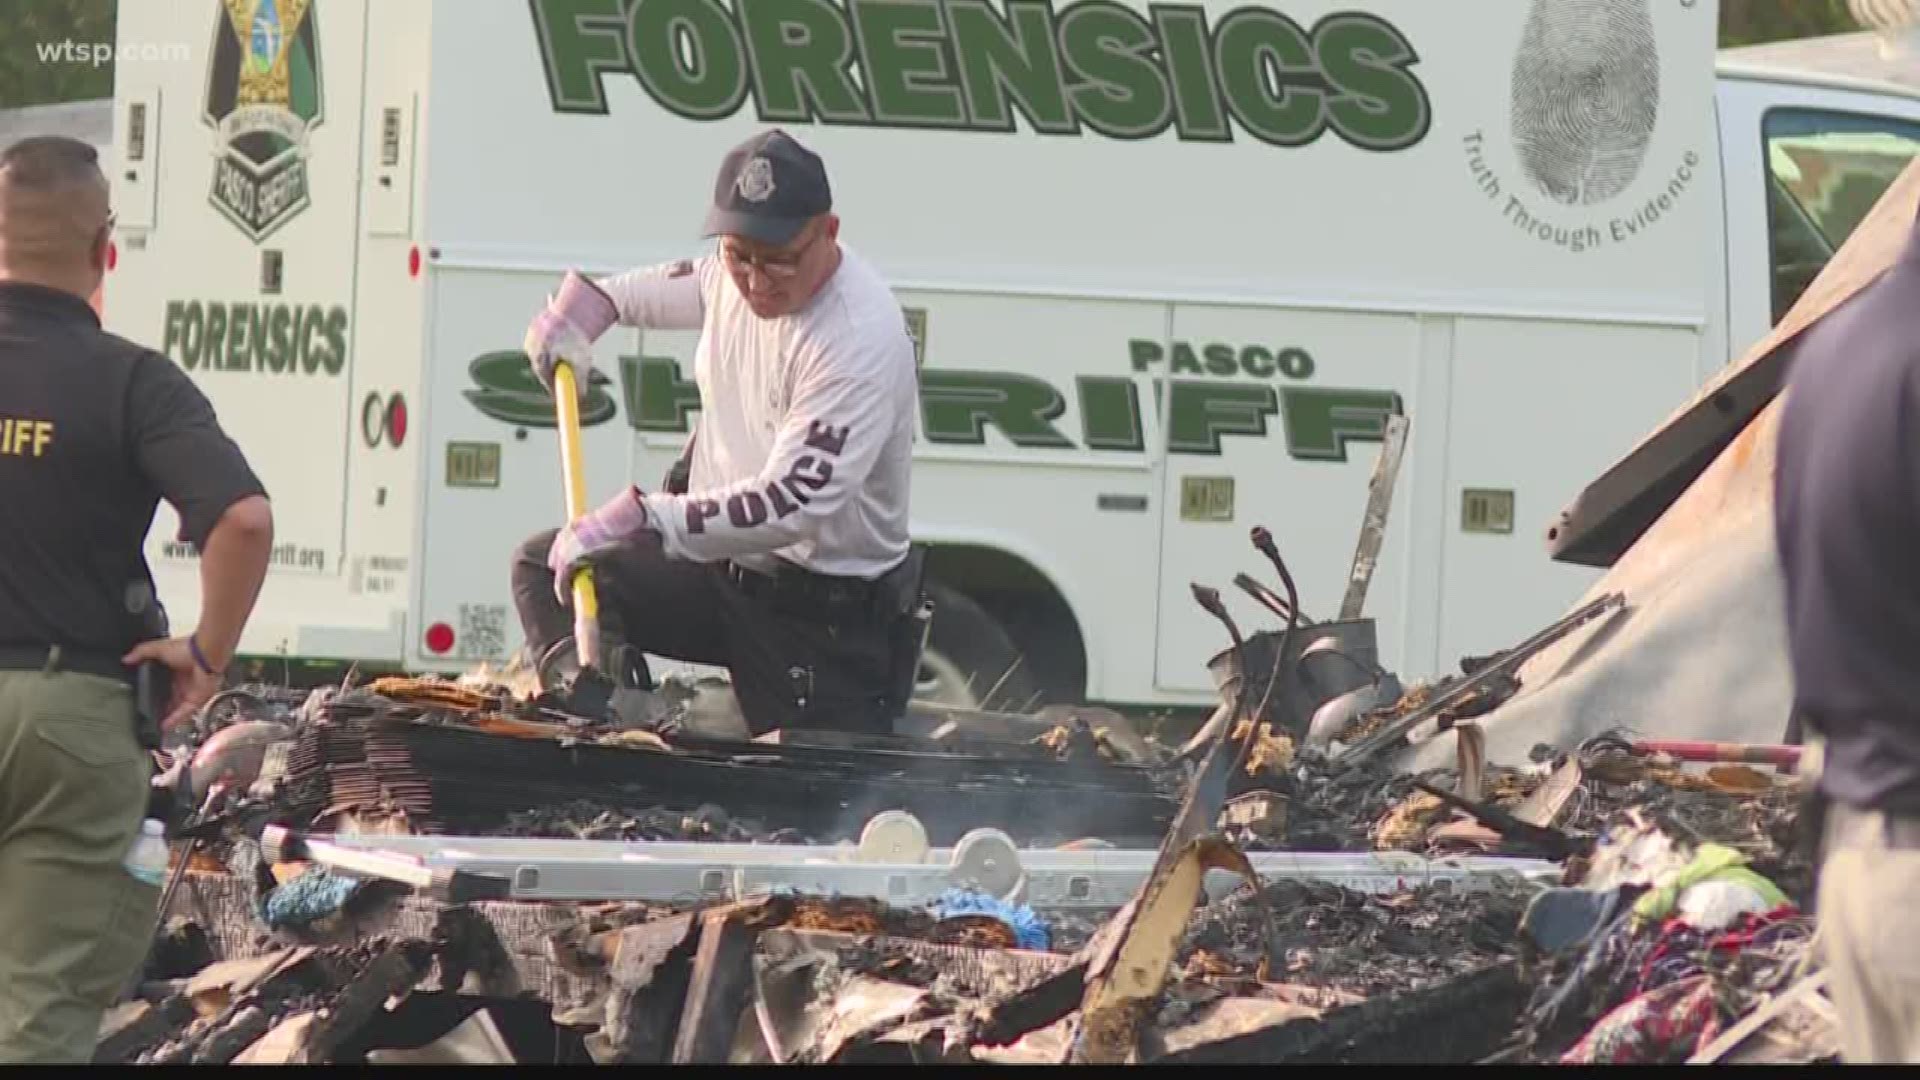 After a Pasco County mobile home exploded, they raced to try to put out the flames and save the victims.